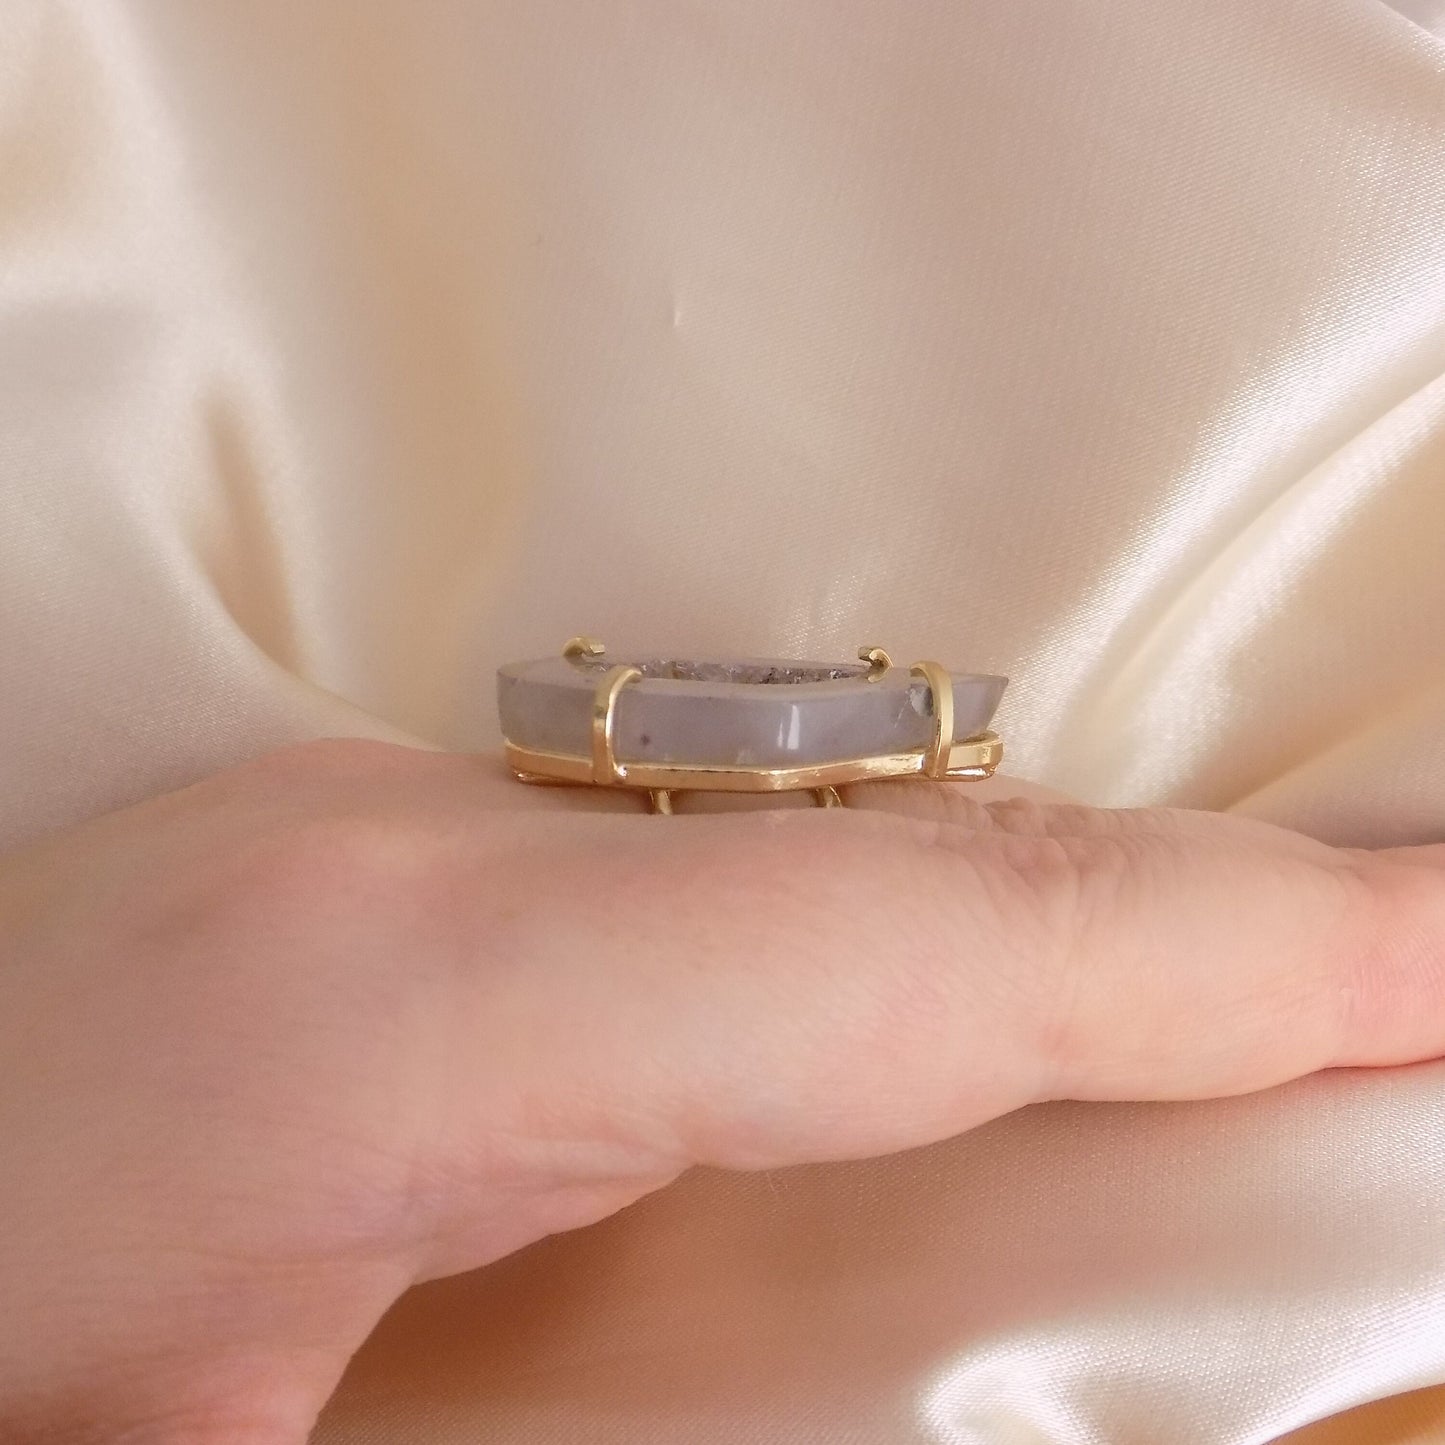 Unique Geode Ring Gold - Adjustable Crystal Rings For Women - Christmas Gift - M7-131